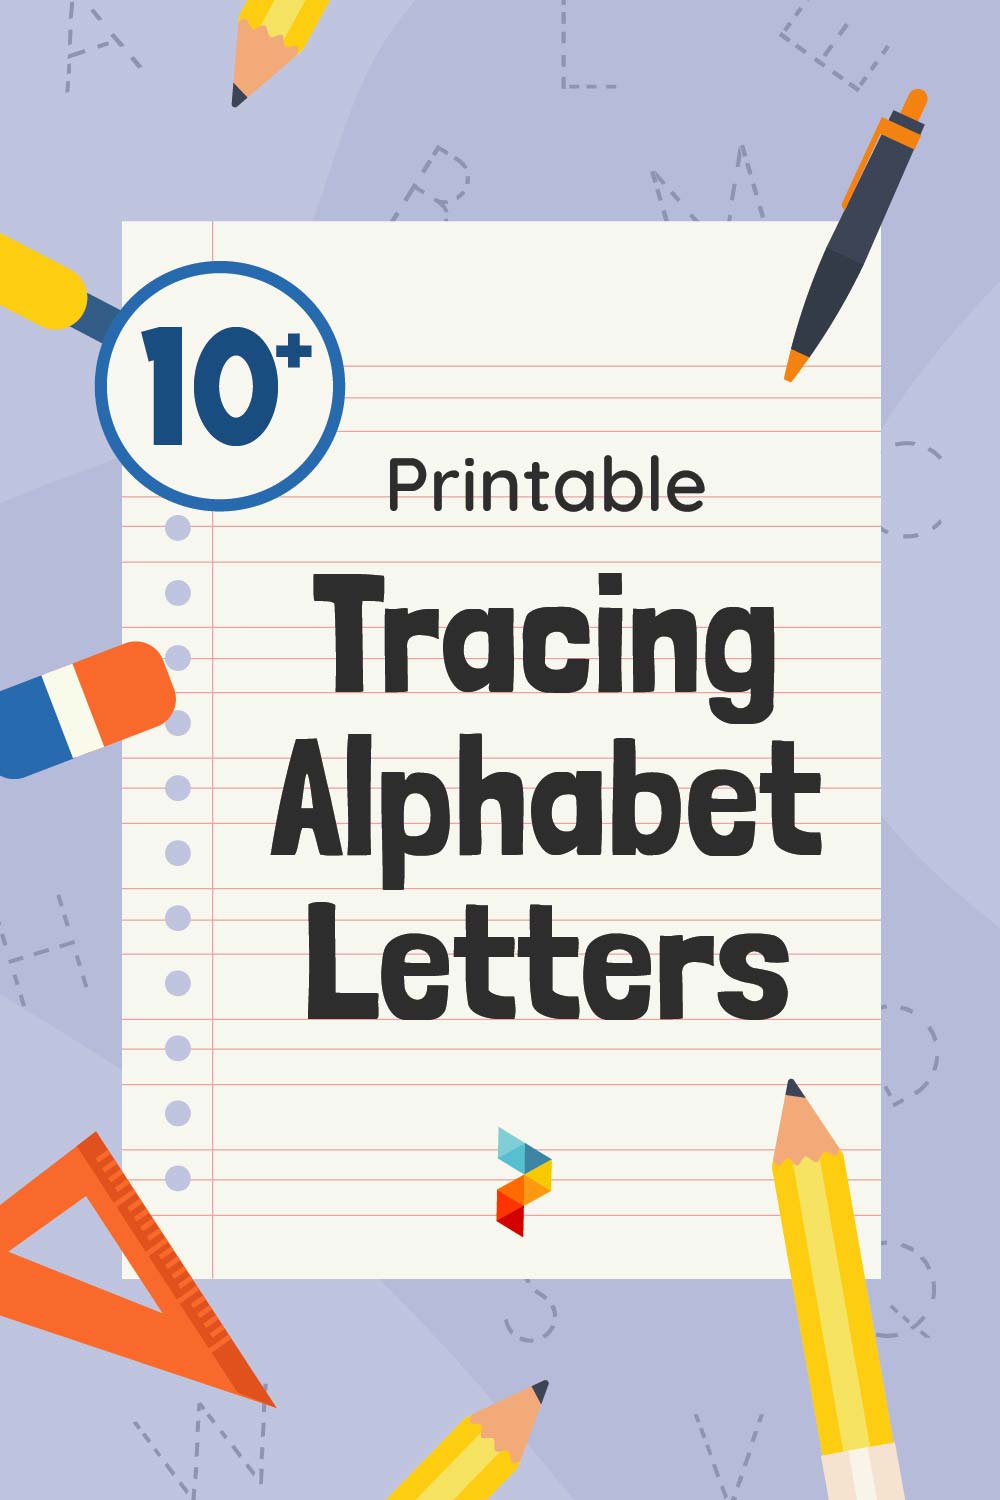 Printable Tracing Alphabet Letters